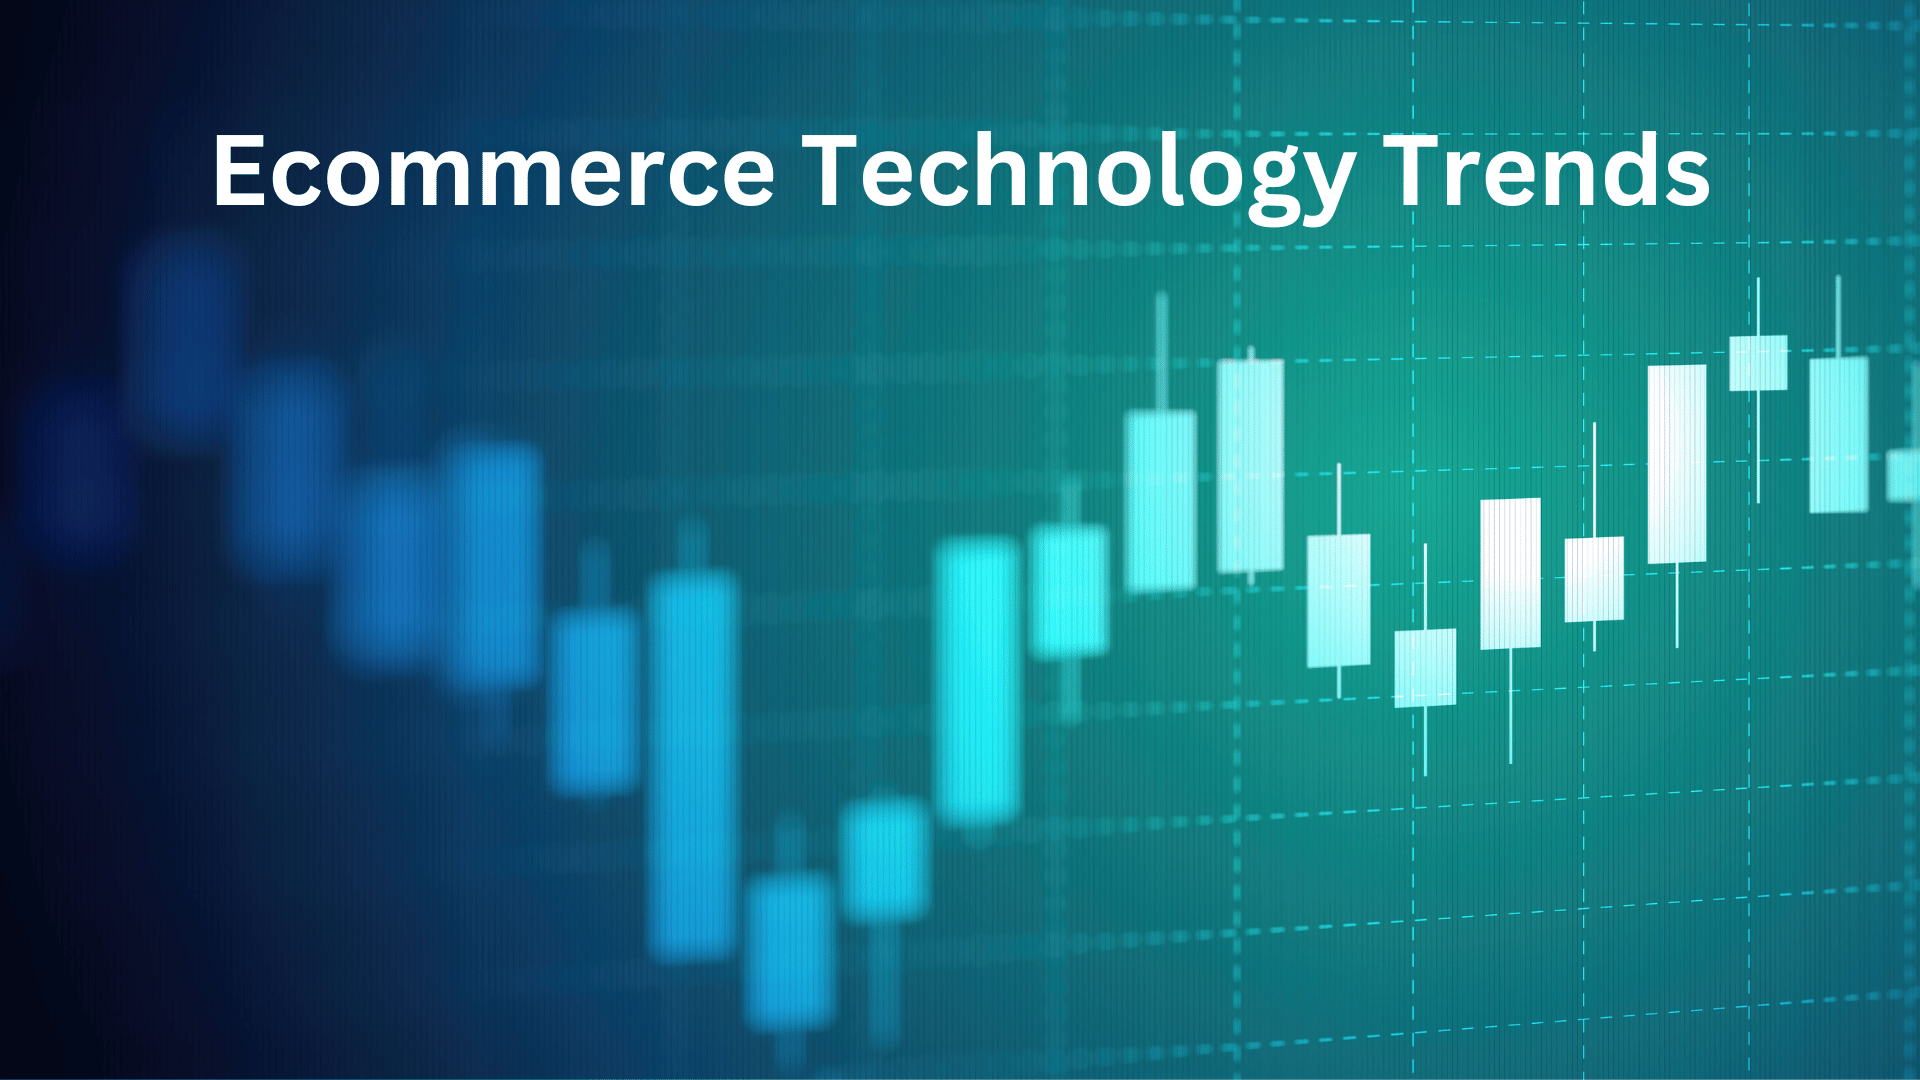 What are e-commerce Technology Trends?